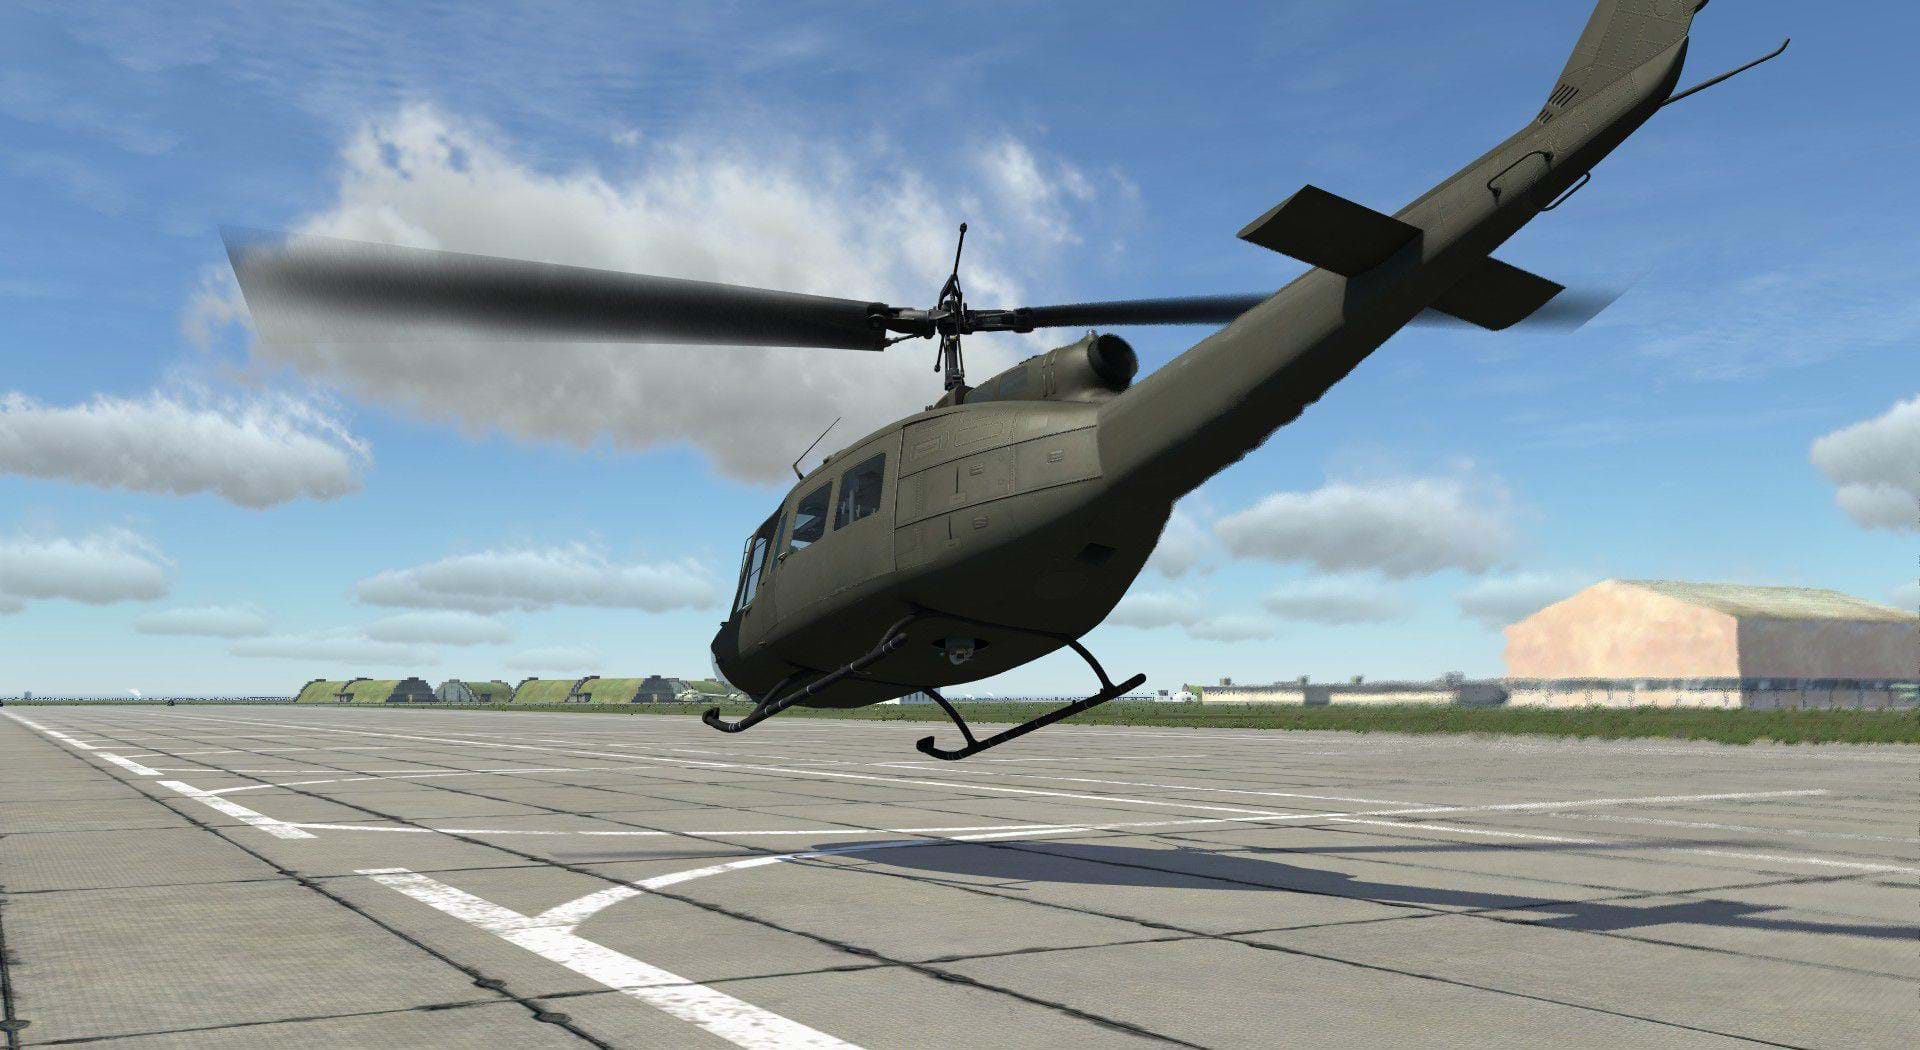 DCS UH-1H taking off